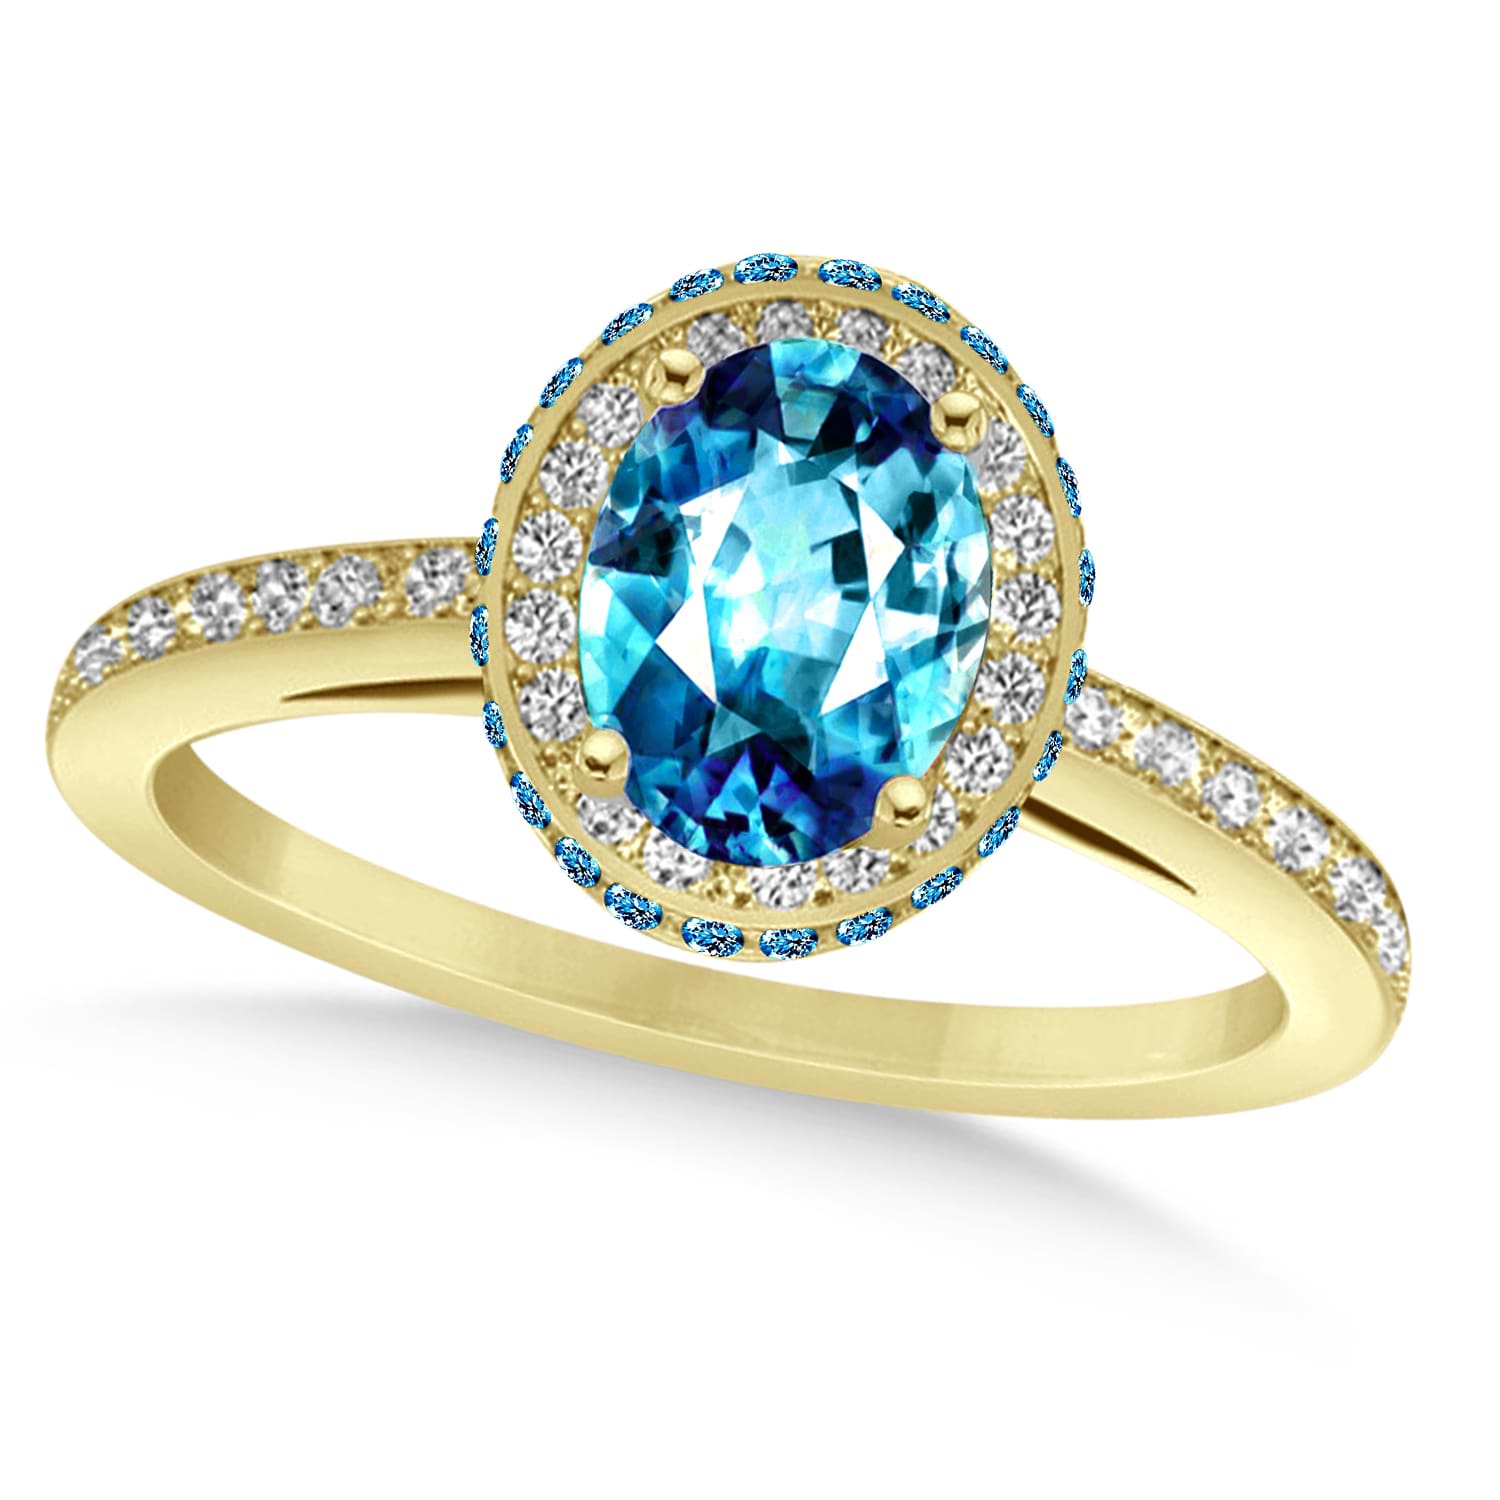 Oval Blue Topaz & Diamond Halo Engagement Ring 14k Yellow Gold (2.10ct)